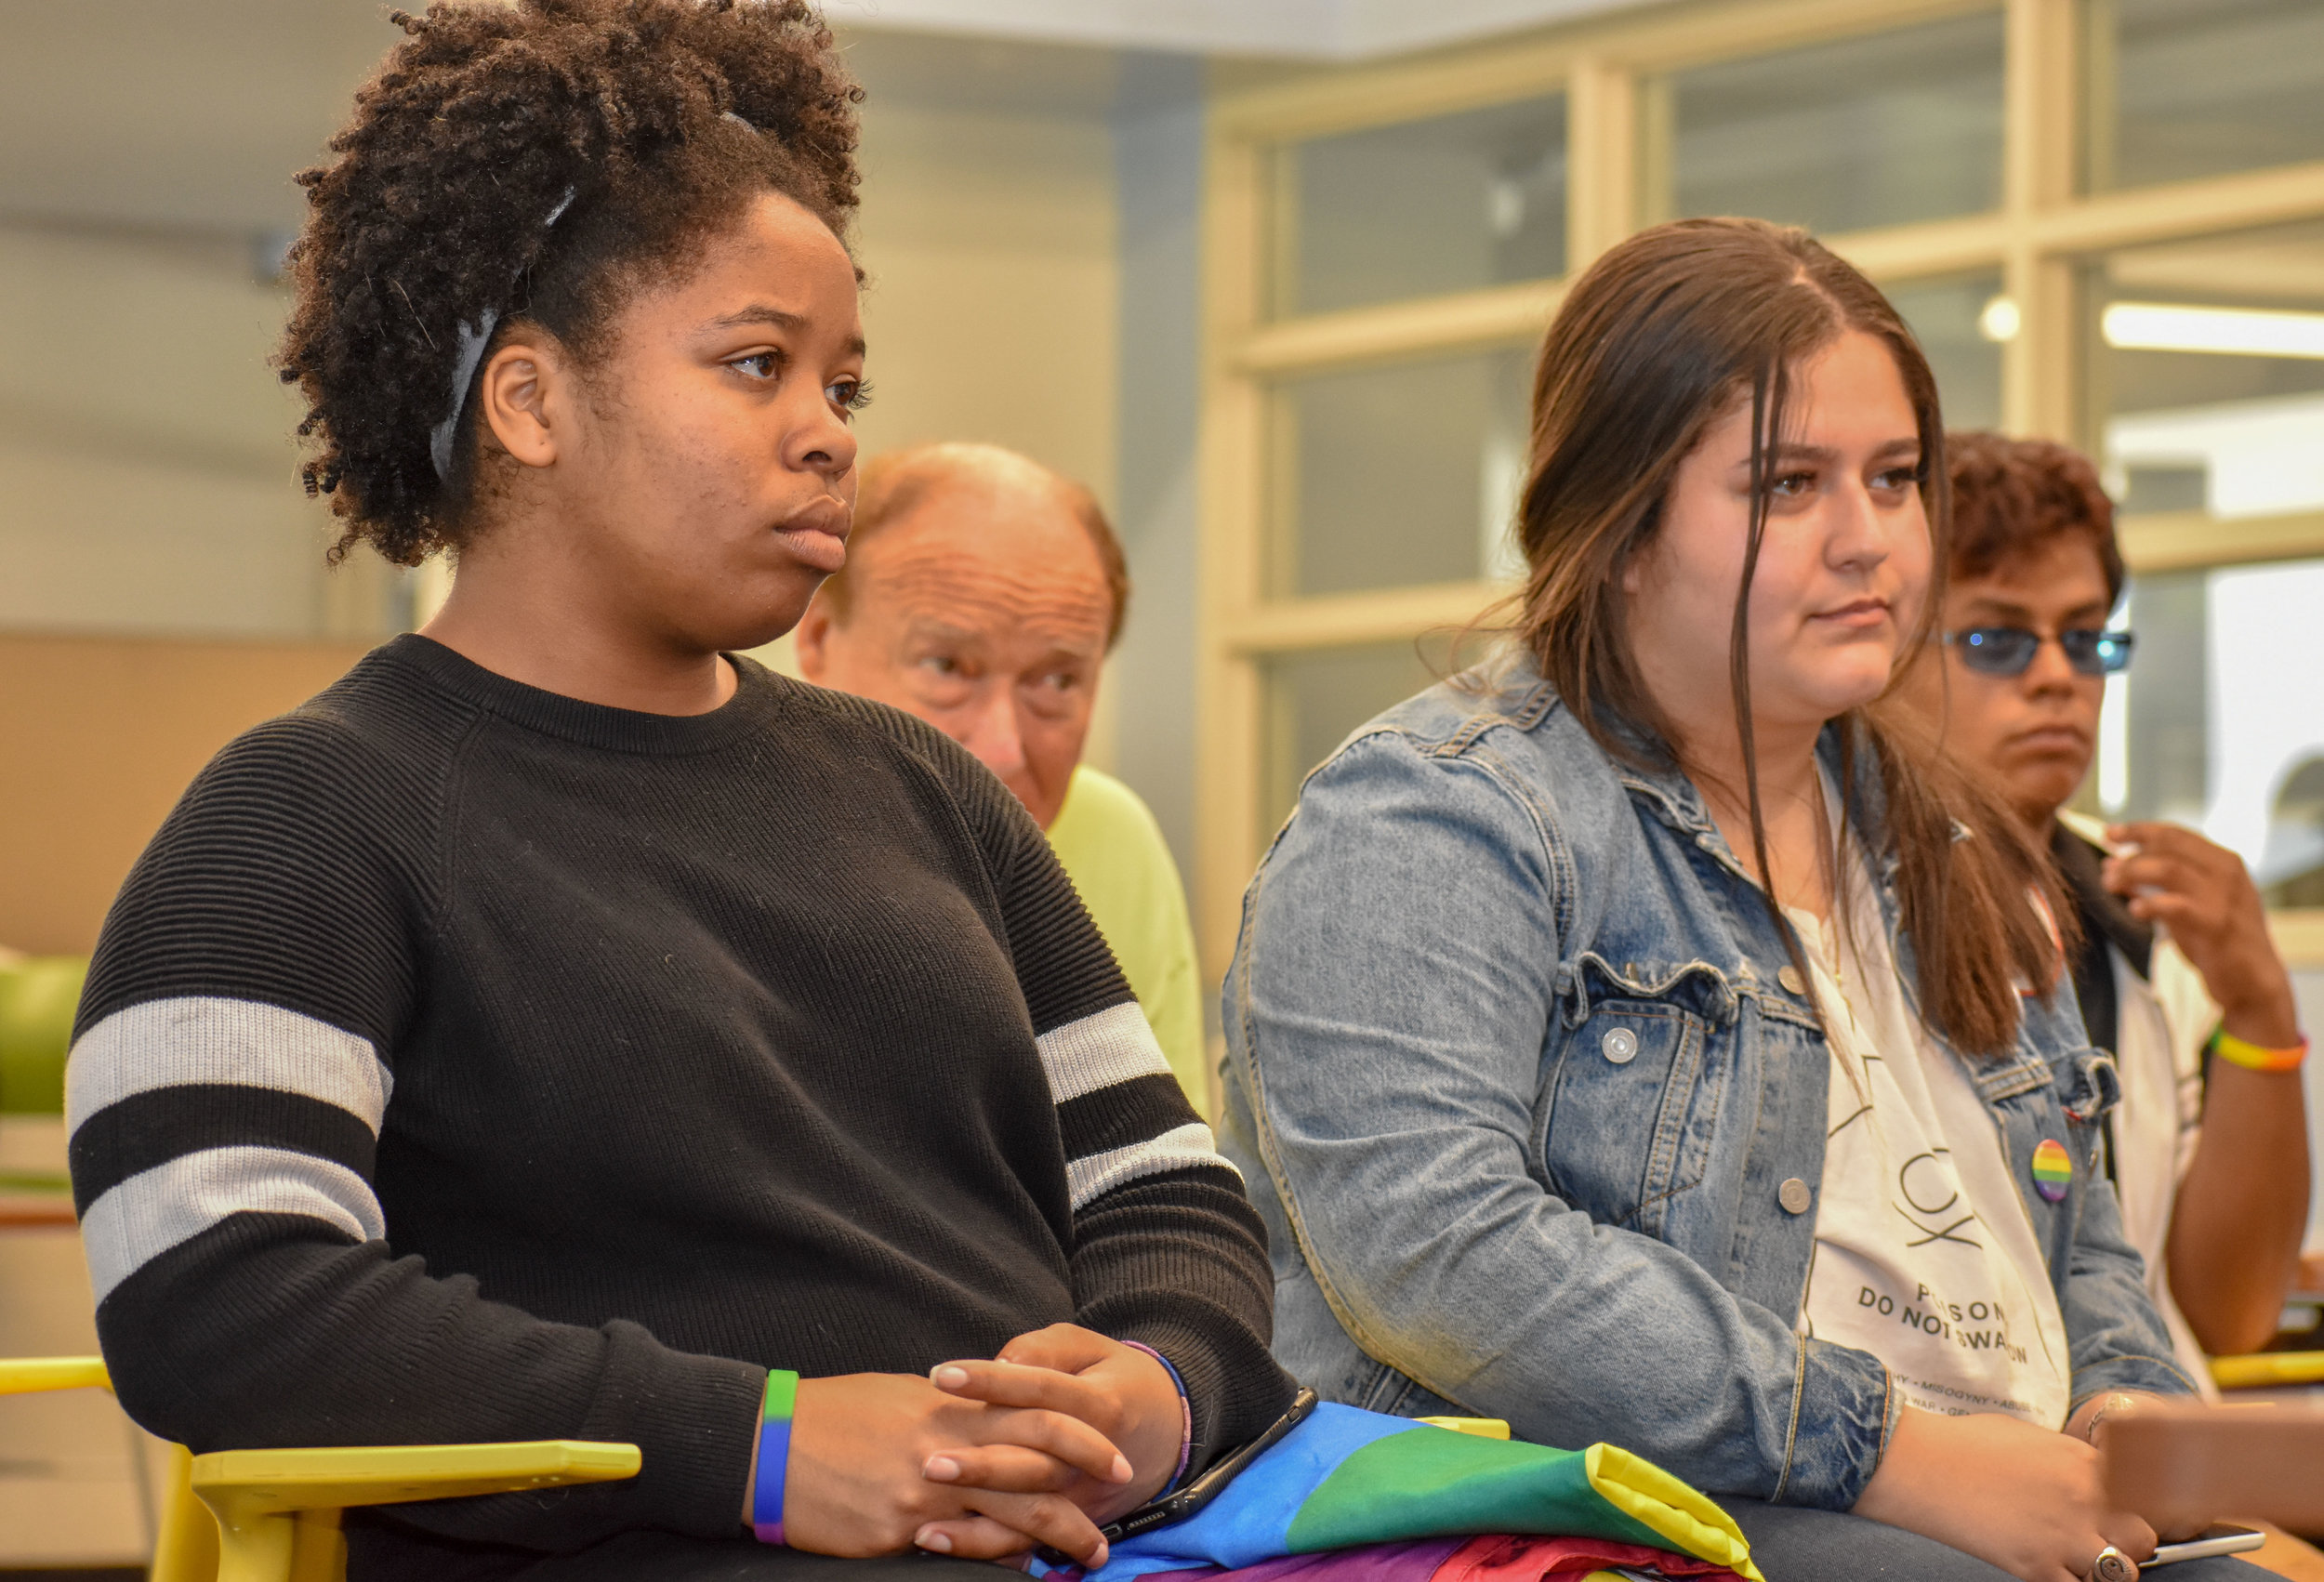  Elise Gary, a kinesiology major at Santa Monica College is also a member of the Gender Sexuality Alliance on campus and watches a panel discussion on the LGBTQ+ community in academia during the school’s Pride Week on Wednesday, May 16 in Santa Monic